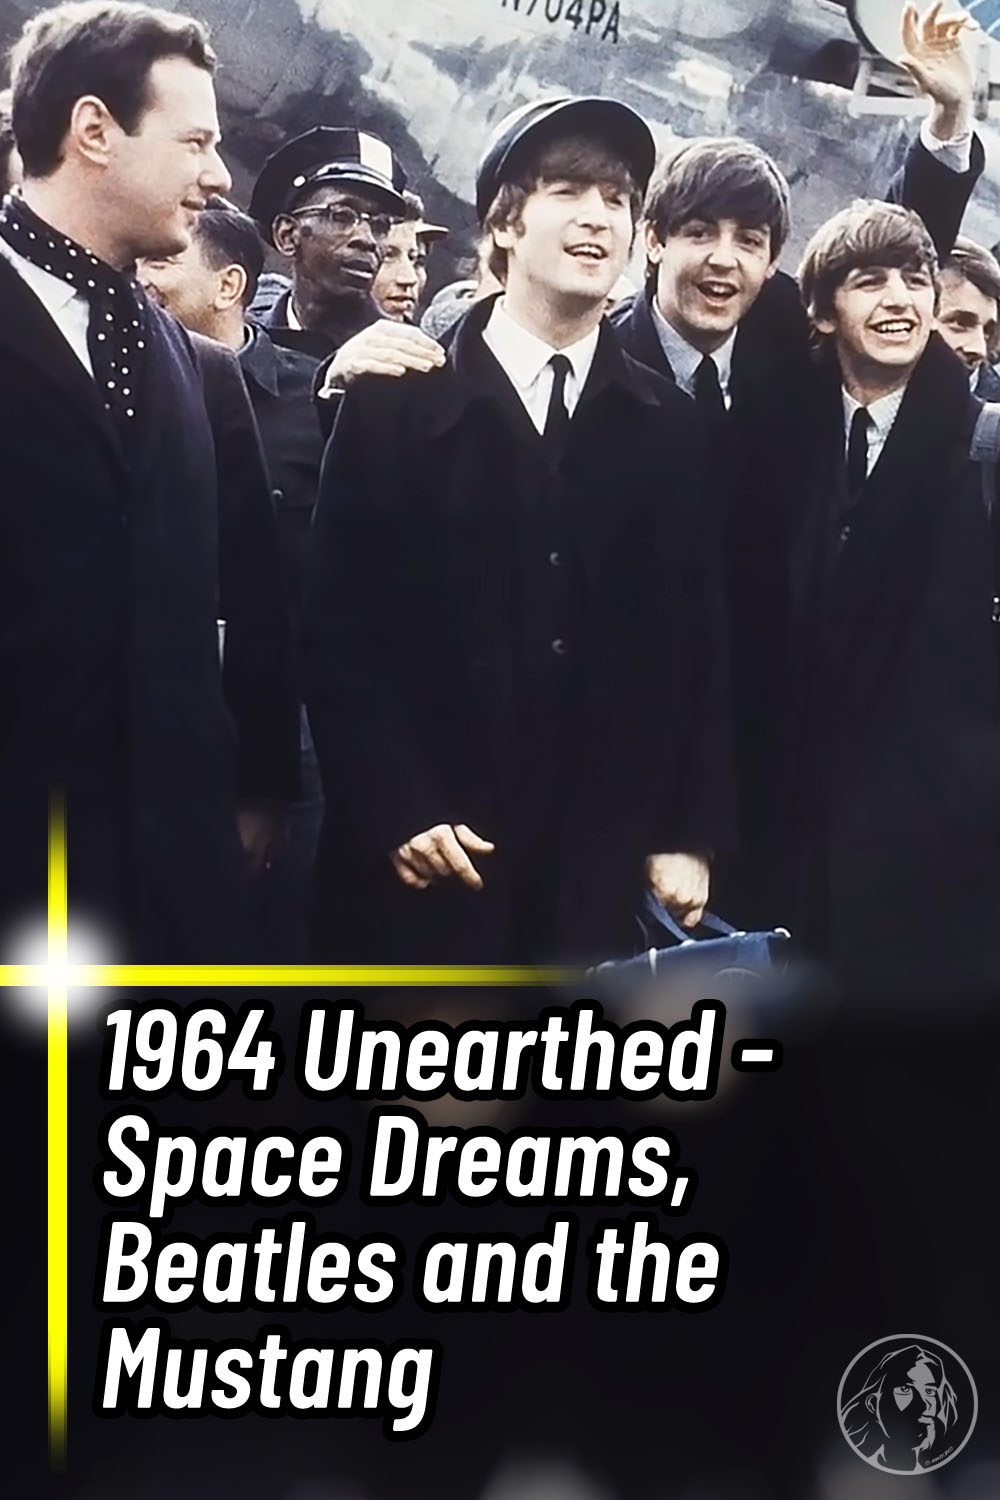 1964 Unearthed - Space Dreams, Beatles and the Mustang